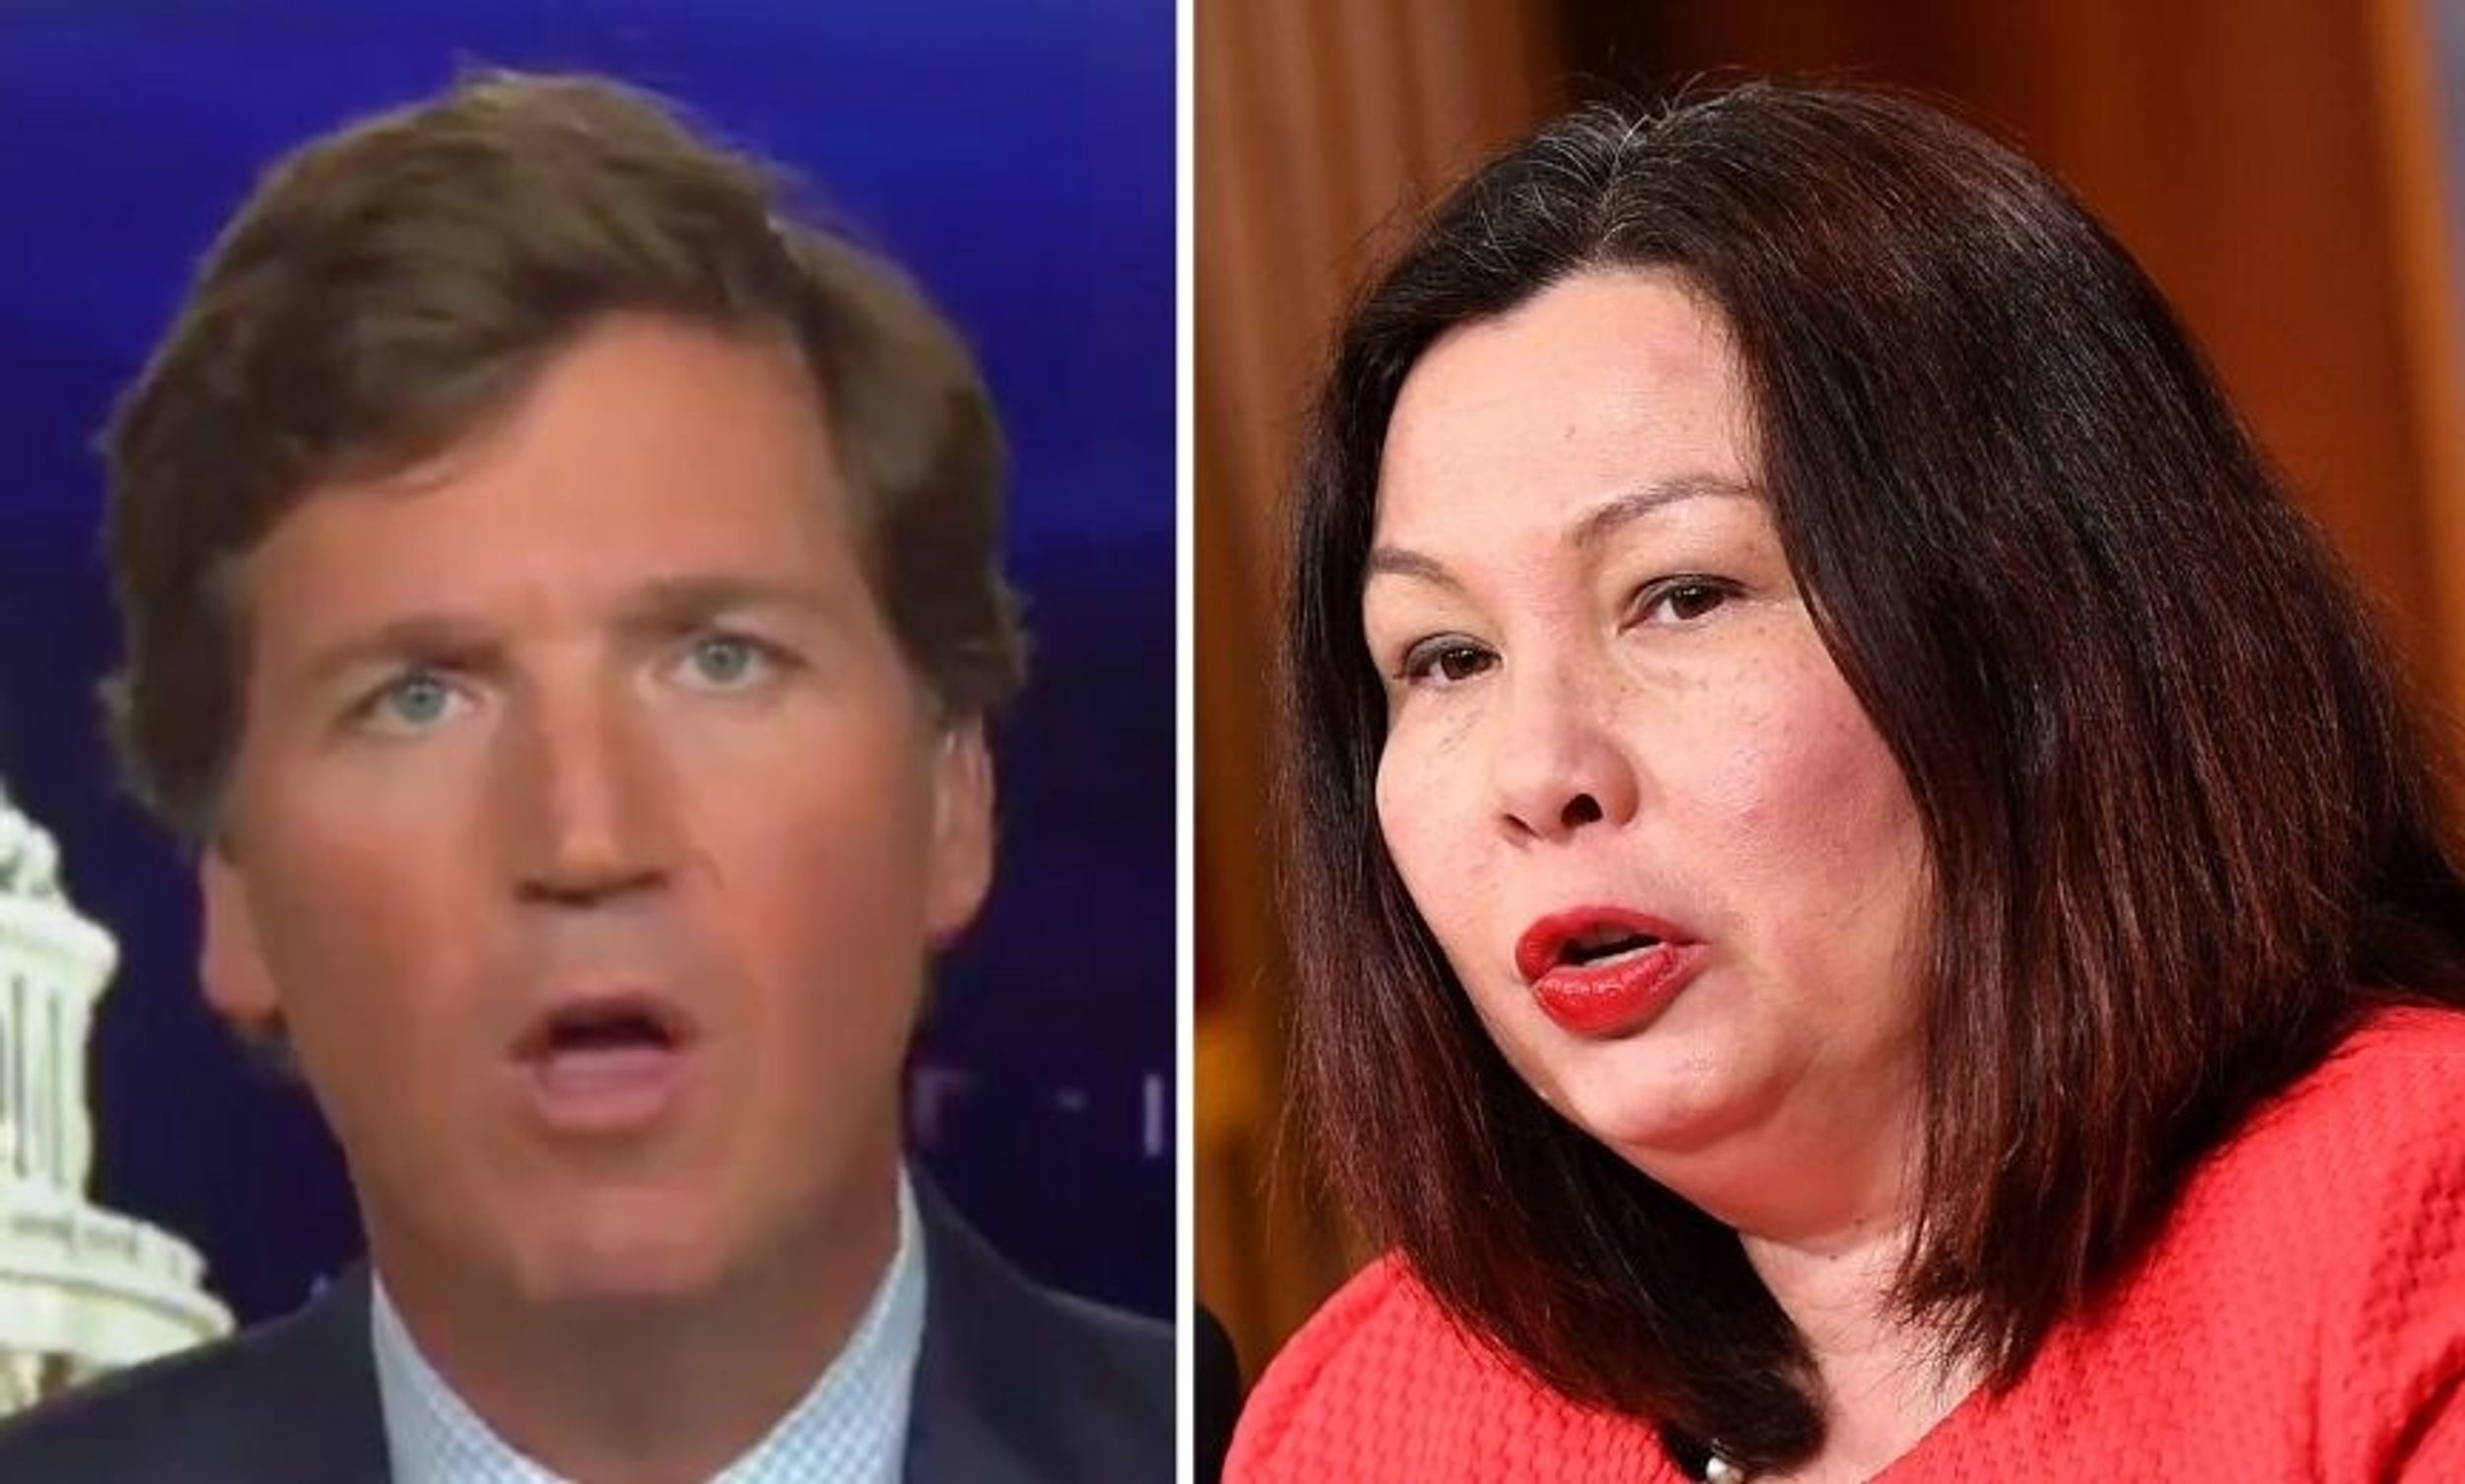 Senator Who Lost Her Legs in Iraq Perfectly Shames Tucker Carlson After He Suggests She 'Hates America'